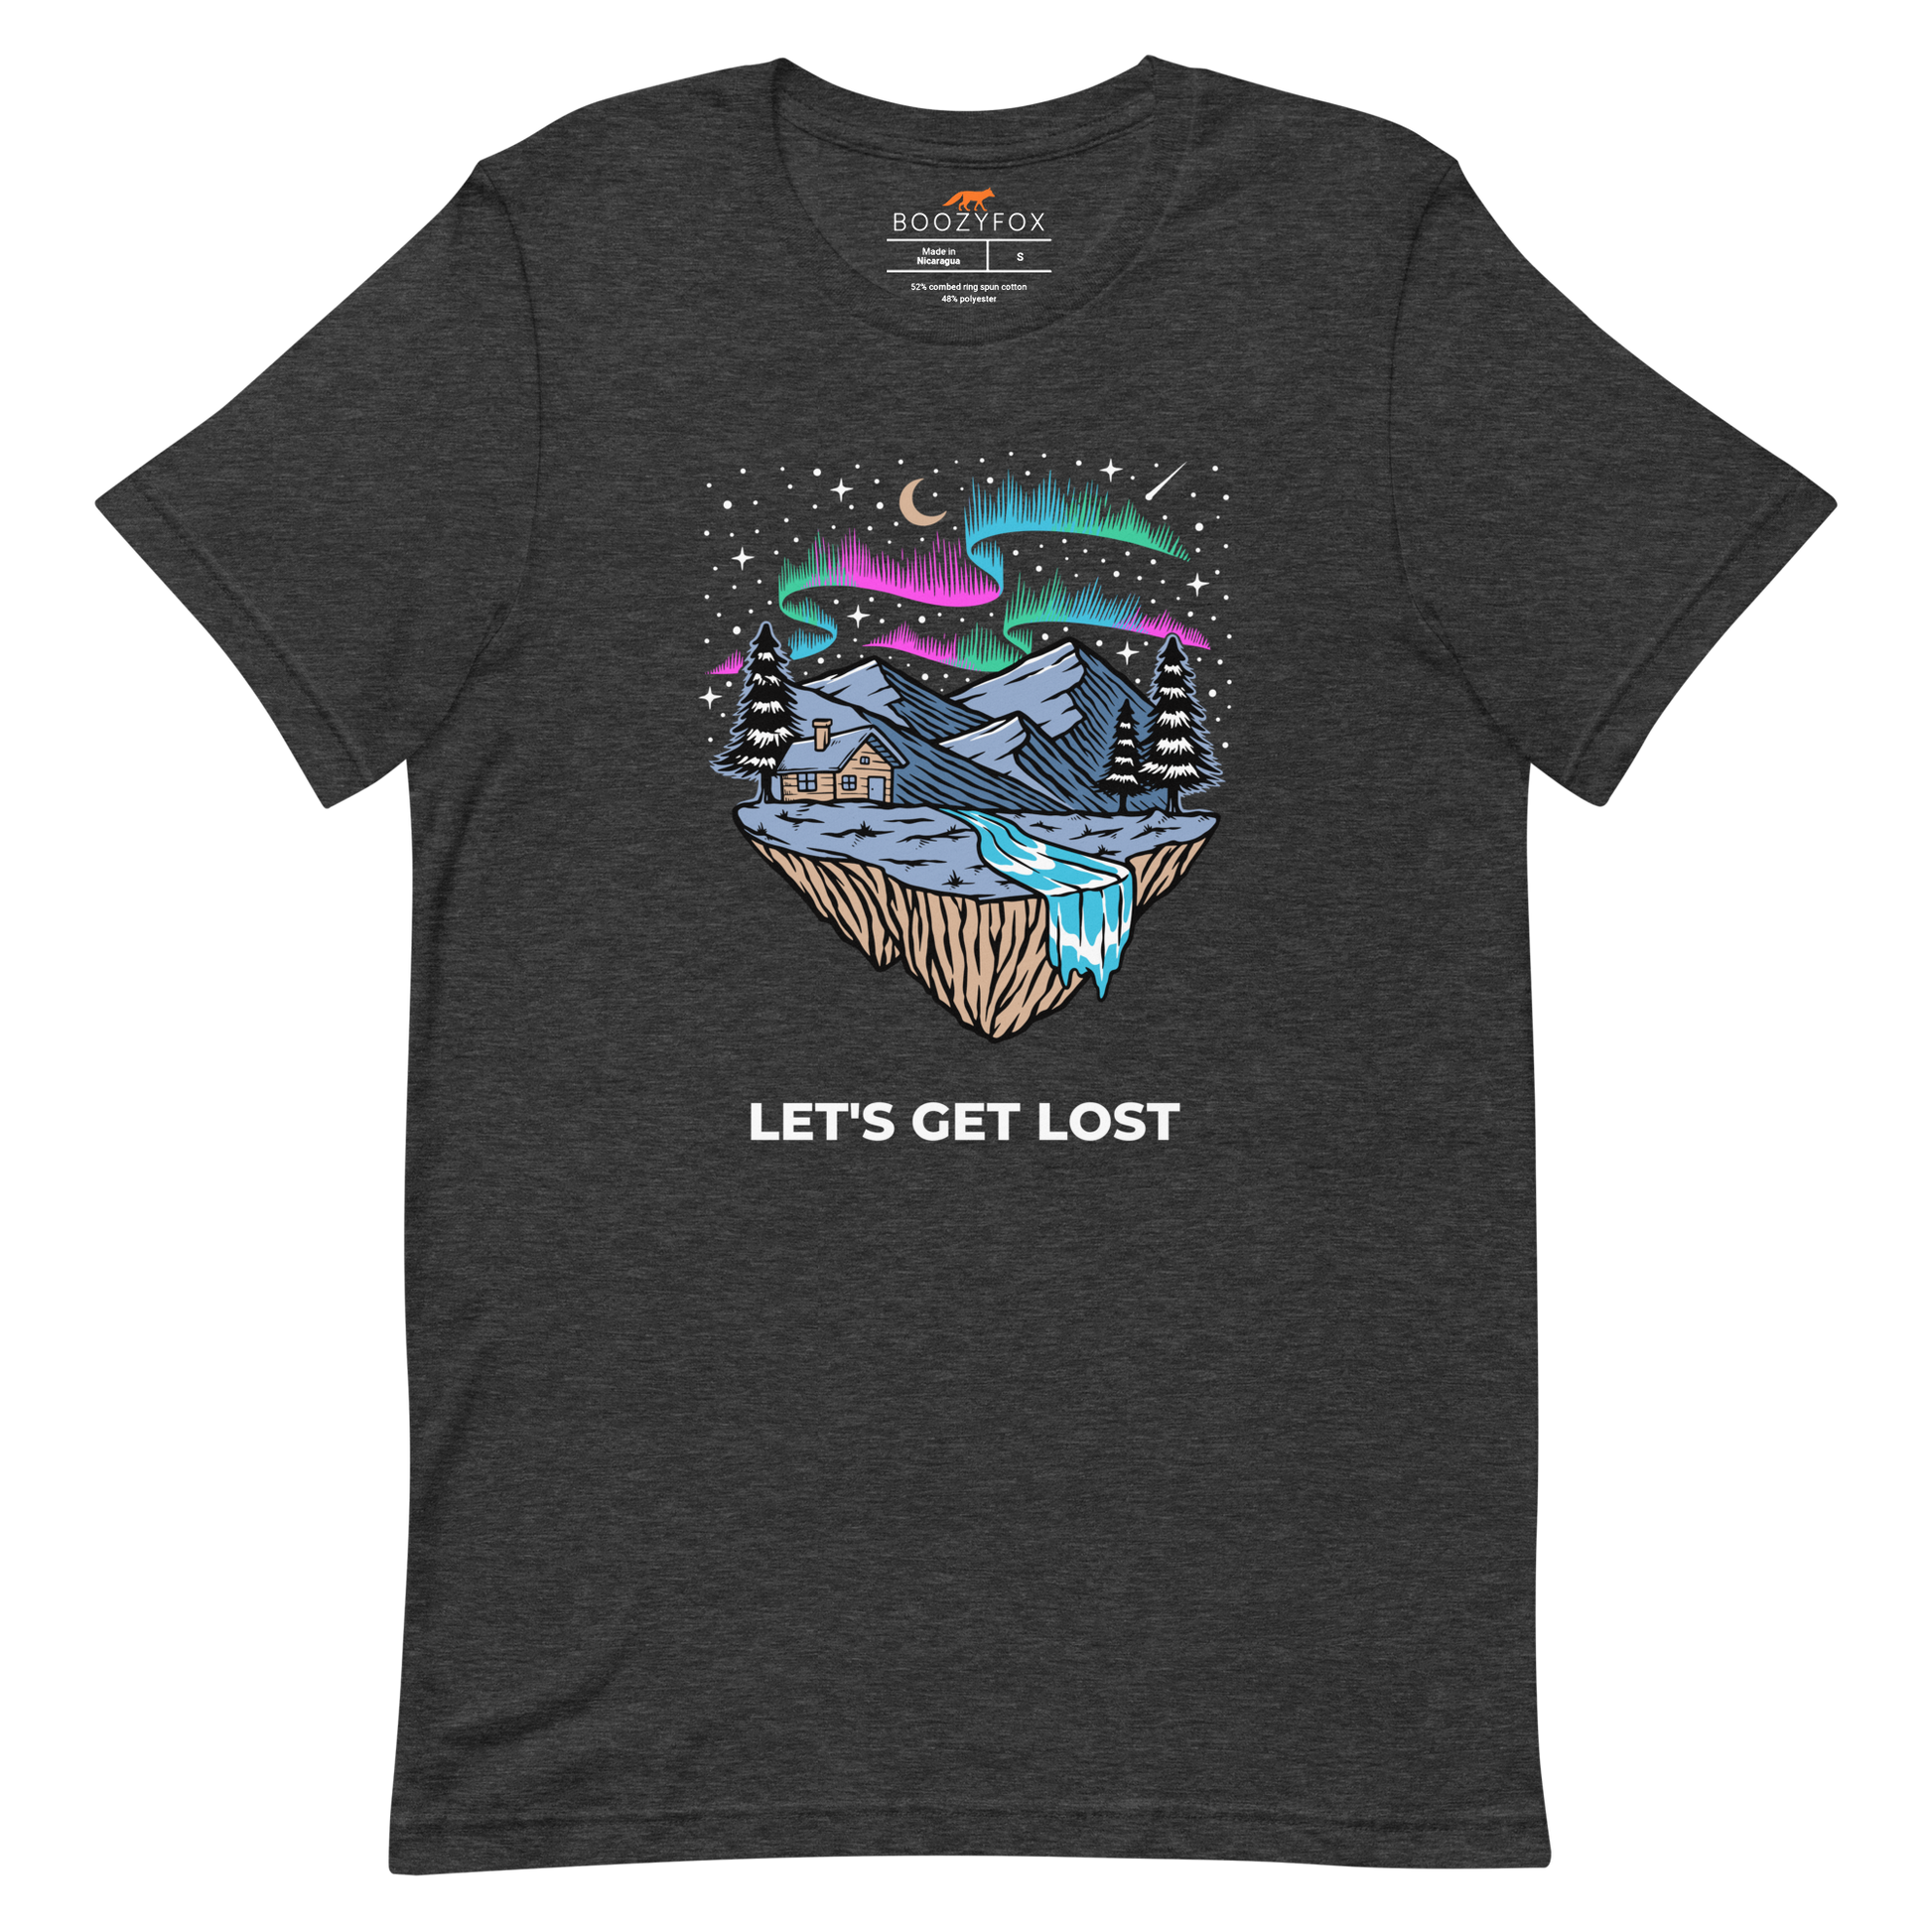 Dark Grey Heather Premium Let's Get Lost Tee featuring a mesmerizing night sky, adorned with stars and aurora borealis graphic on the chest - Cool Graphic Northern Lights Tees - Boozy Fox